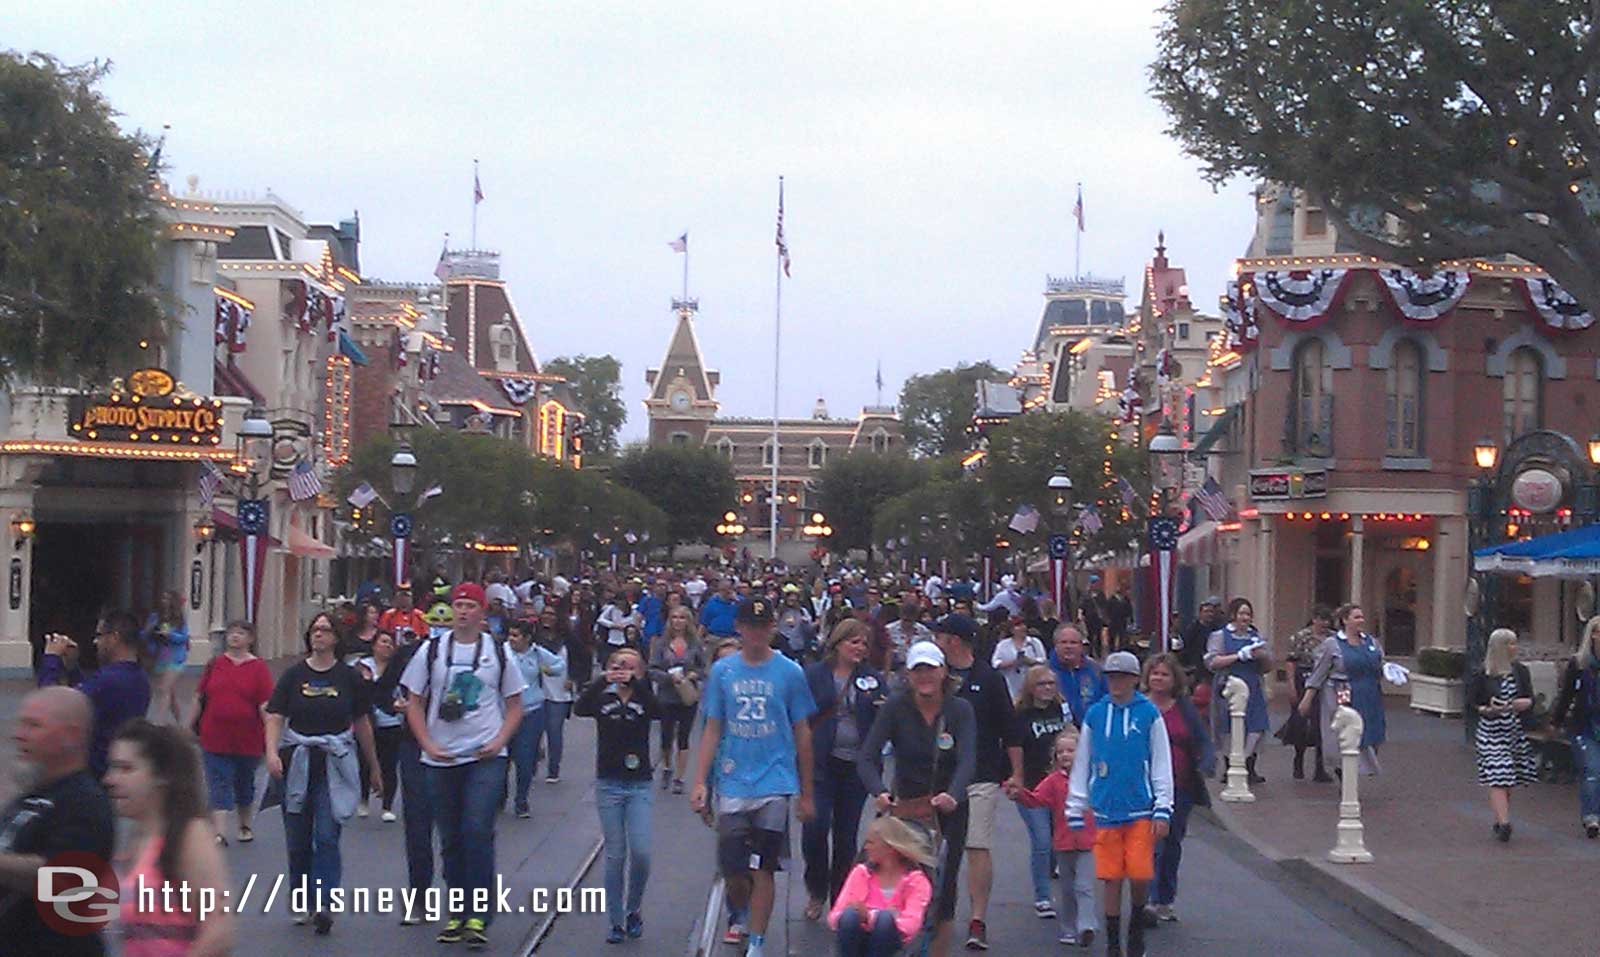 Guests streaming into the park